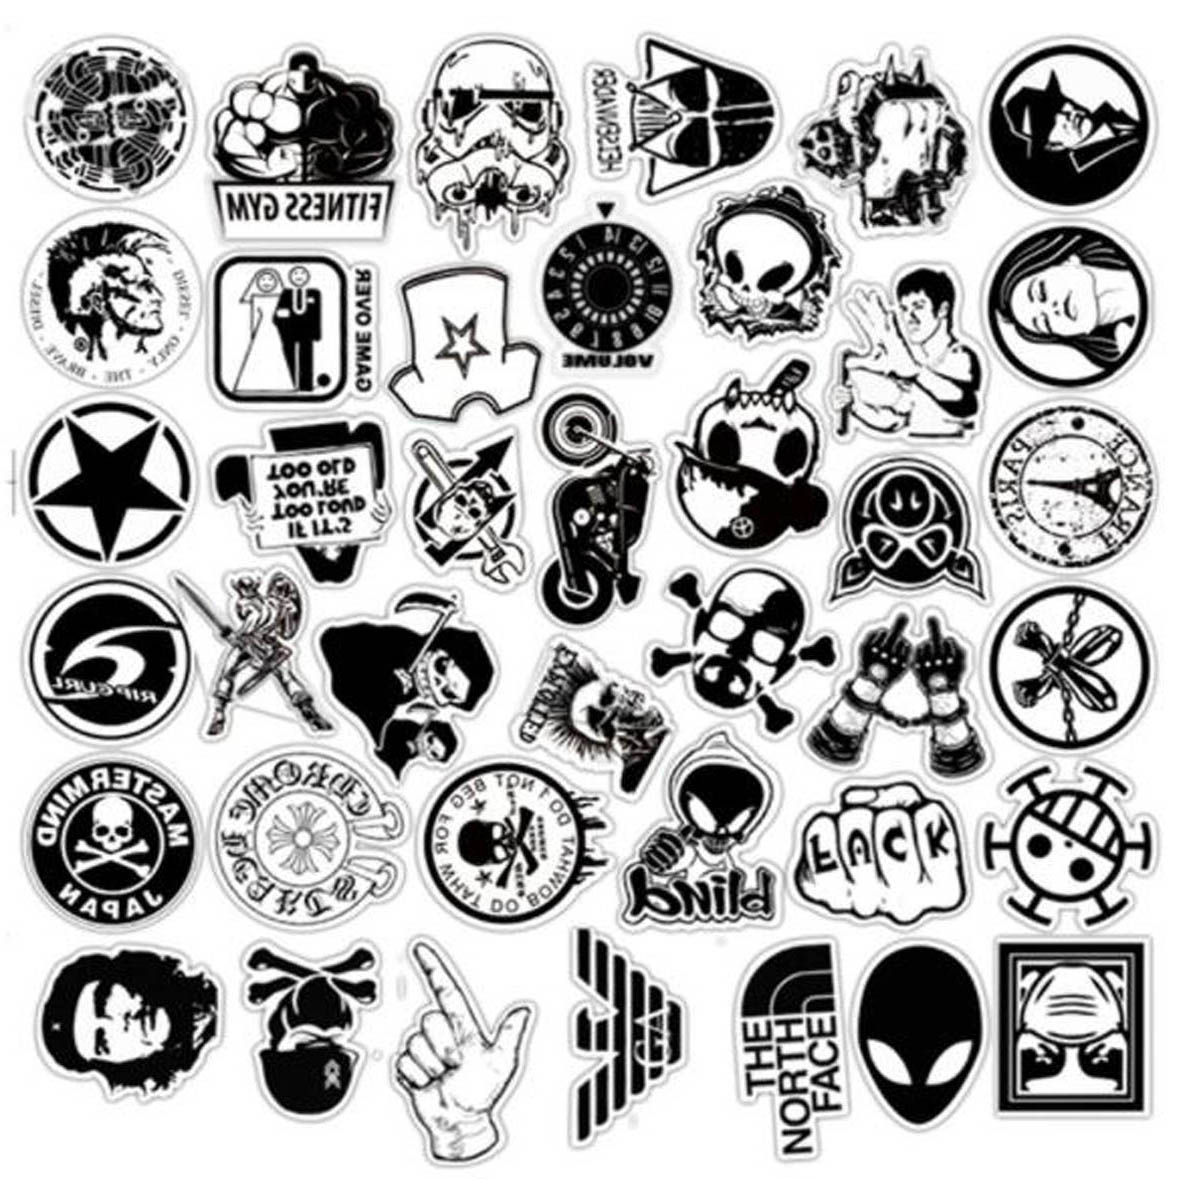 GL-ELY1348 60pcs/set Black and White Bumper Decal